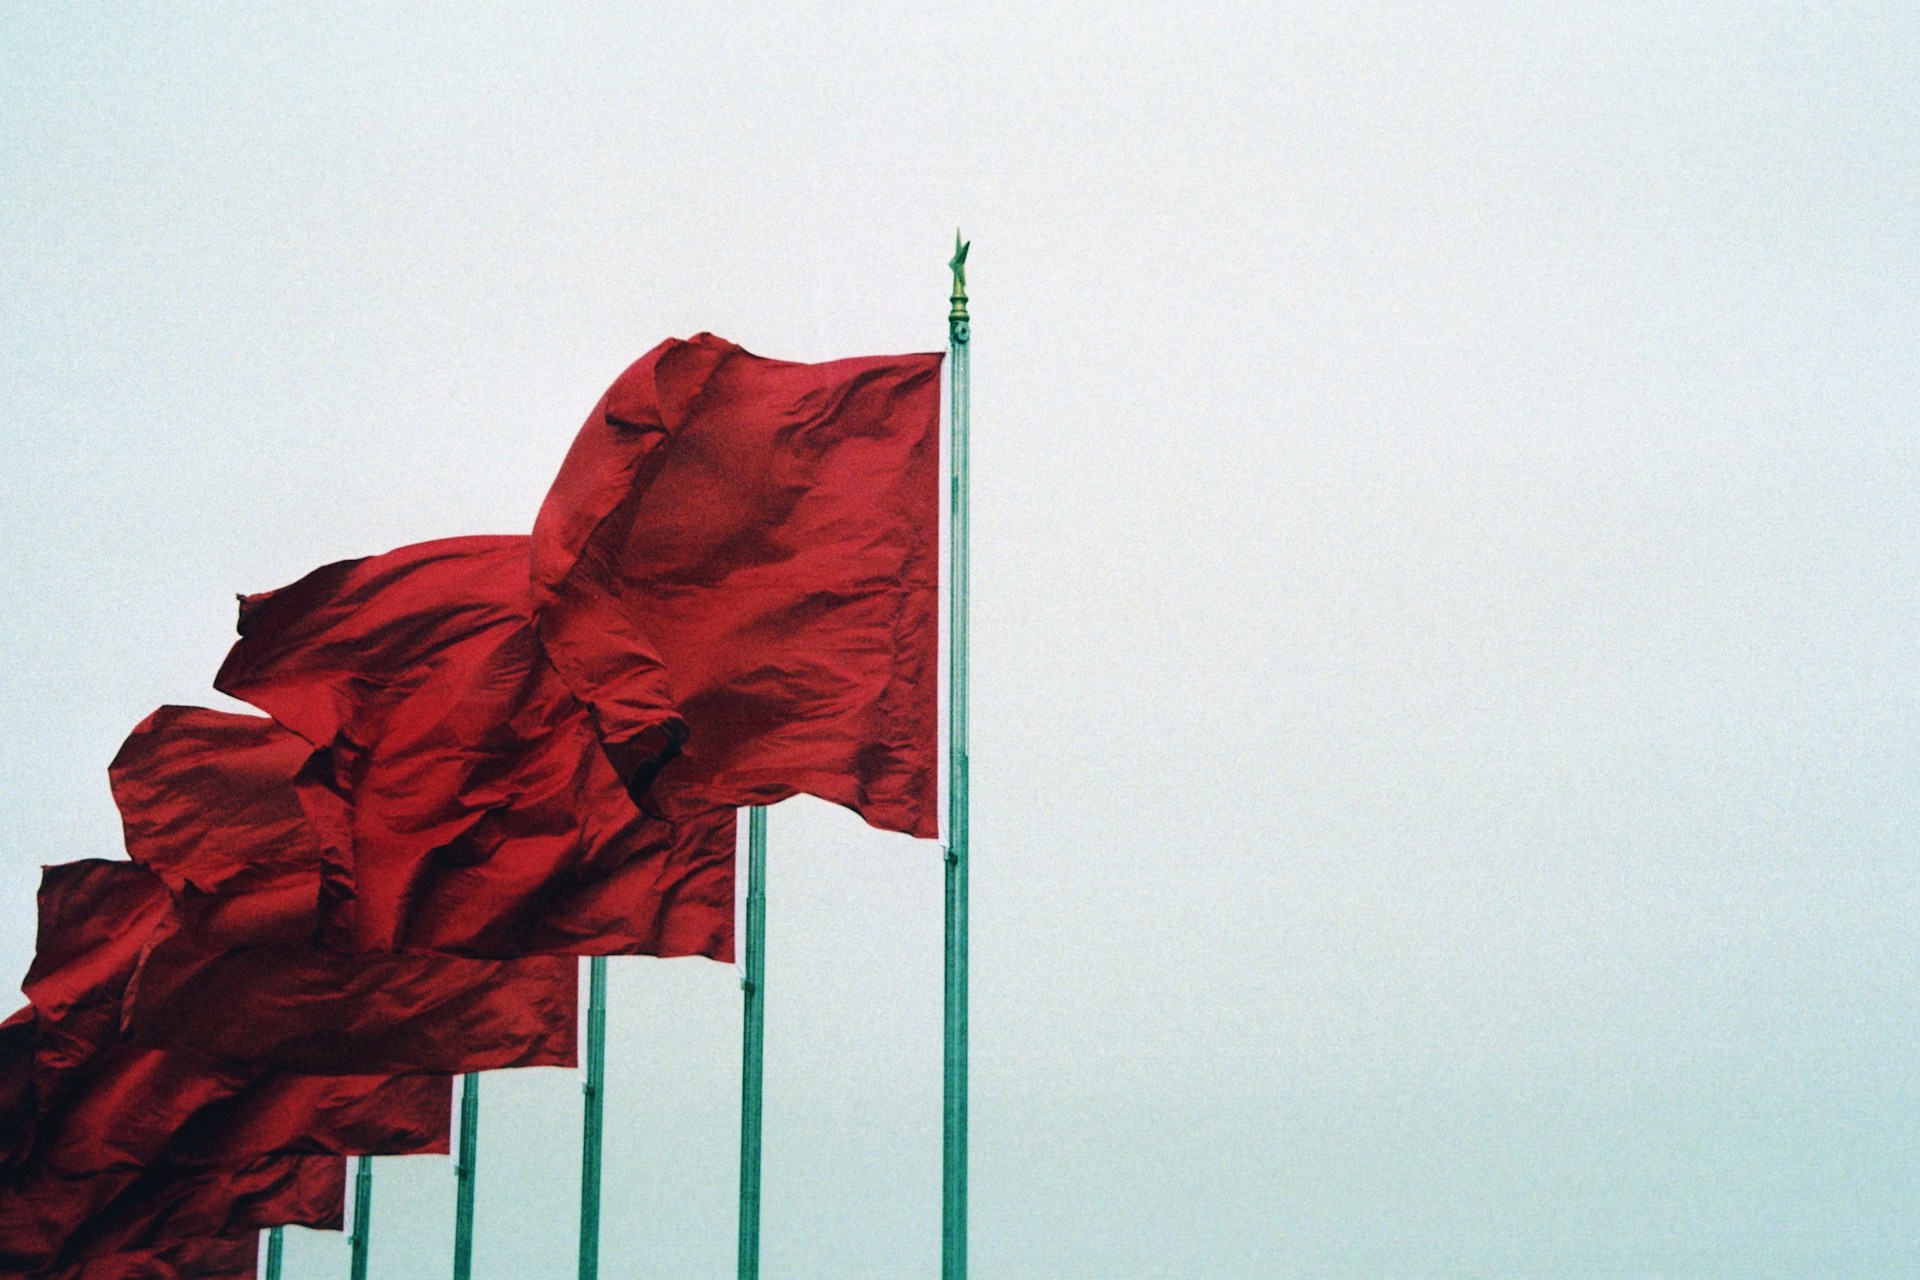 Red flags swinging in the wind. Image by Unsplash